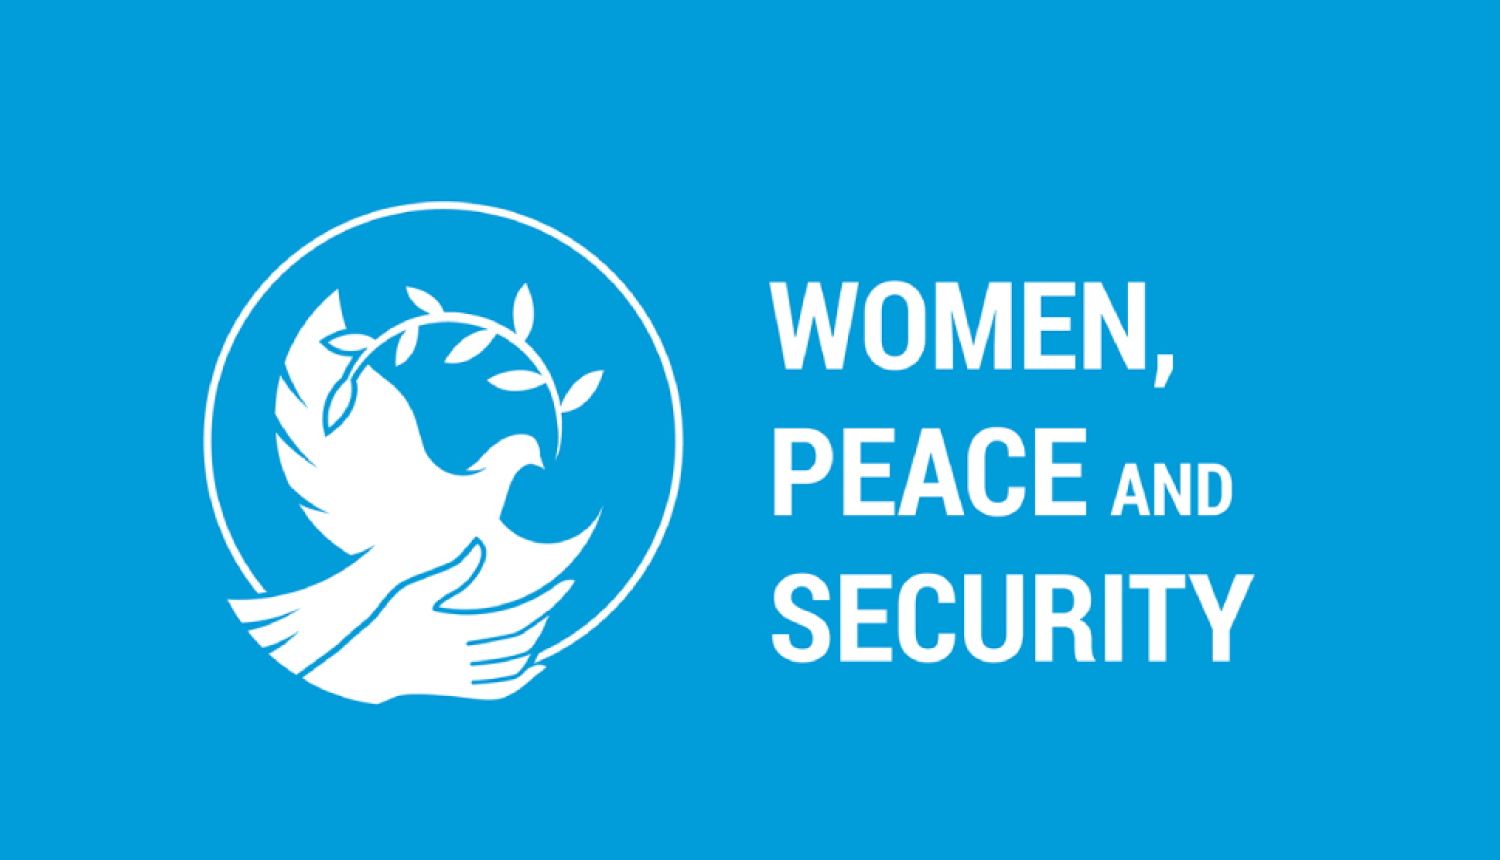 Women, peace and security